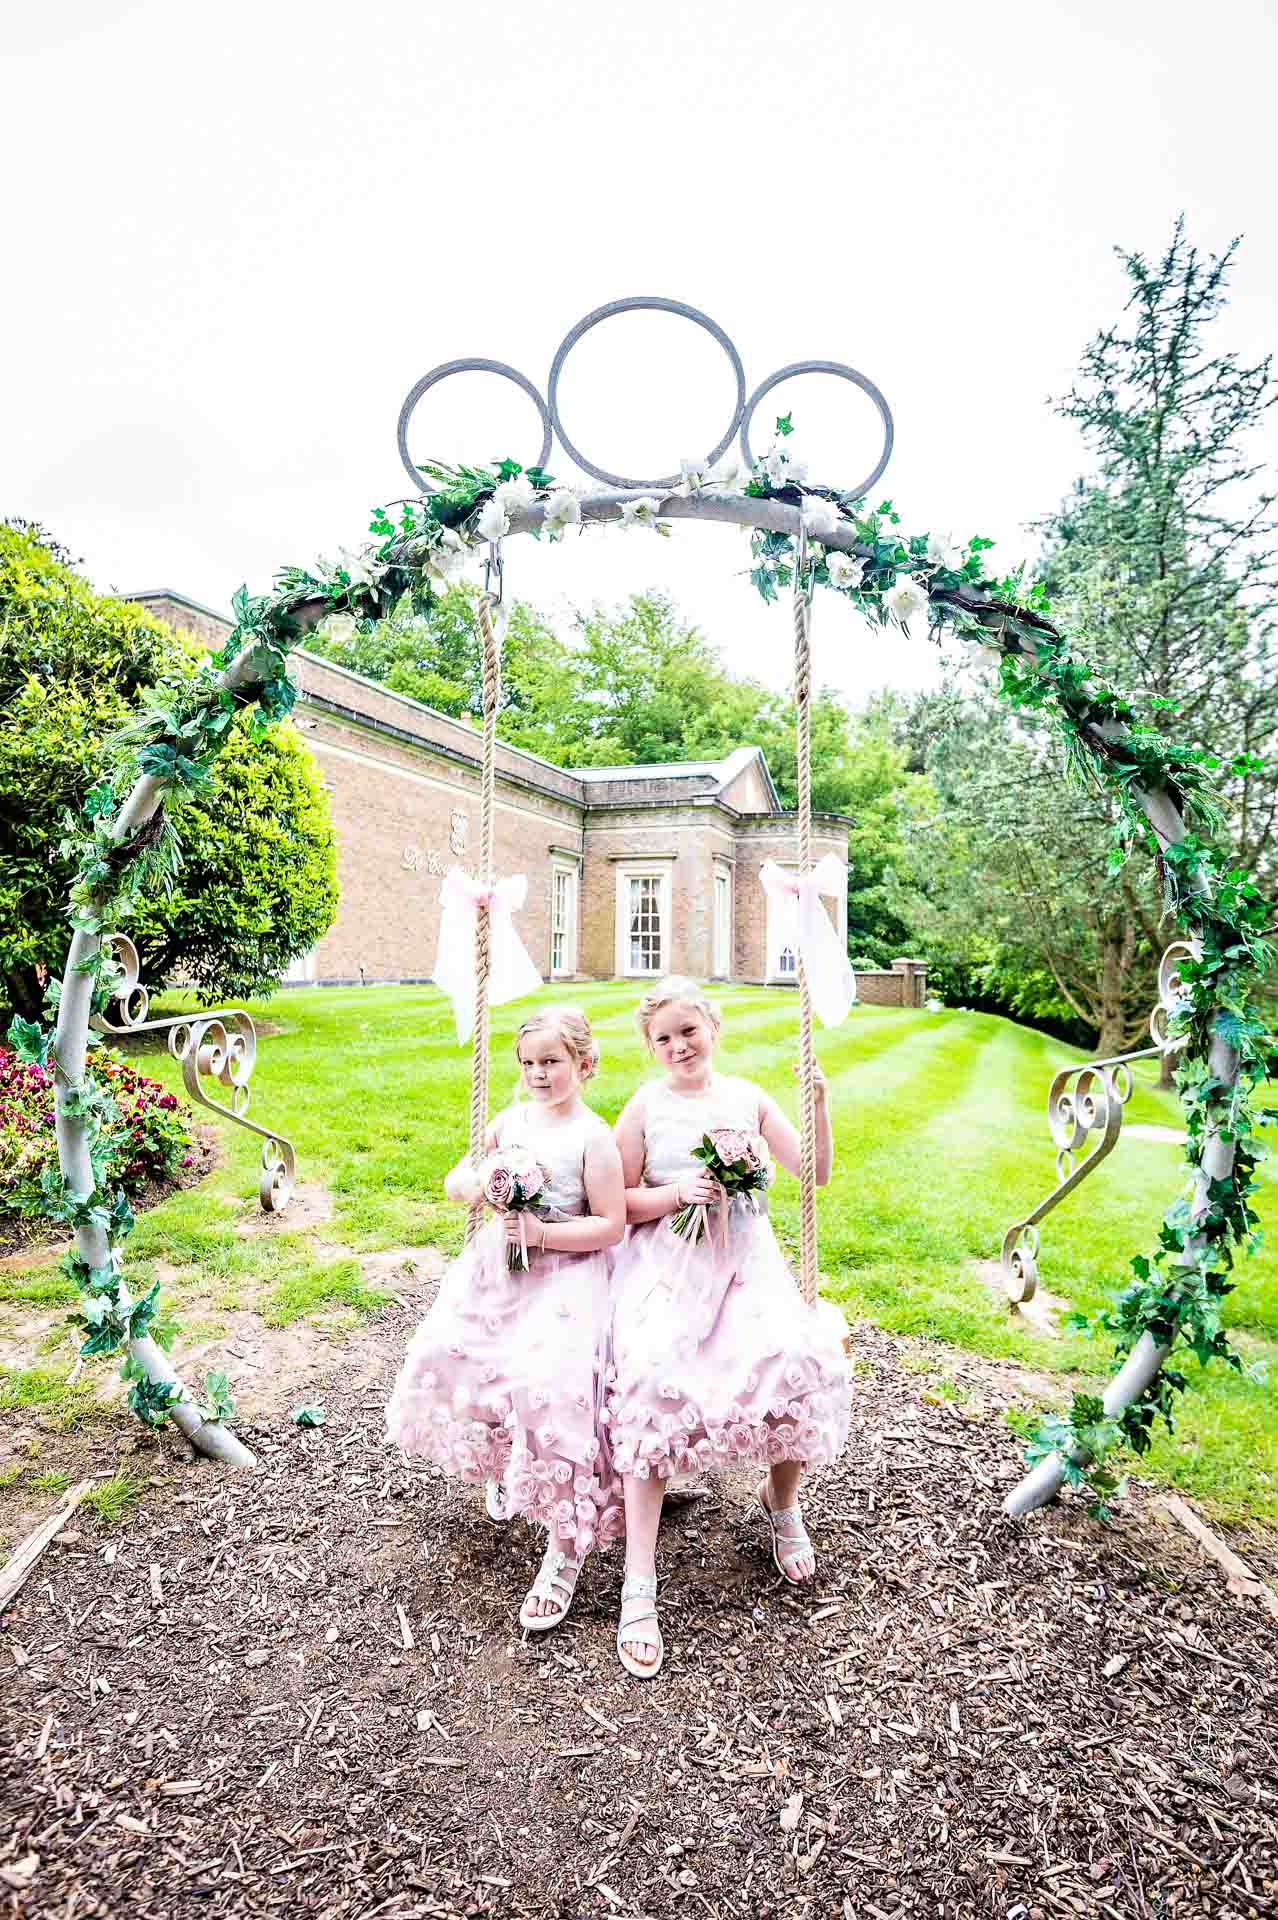 Two bridesmaids on decorative swing at wedding